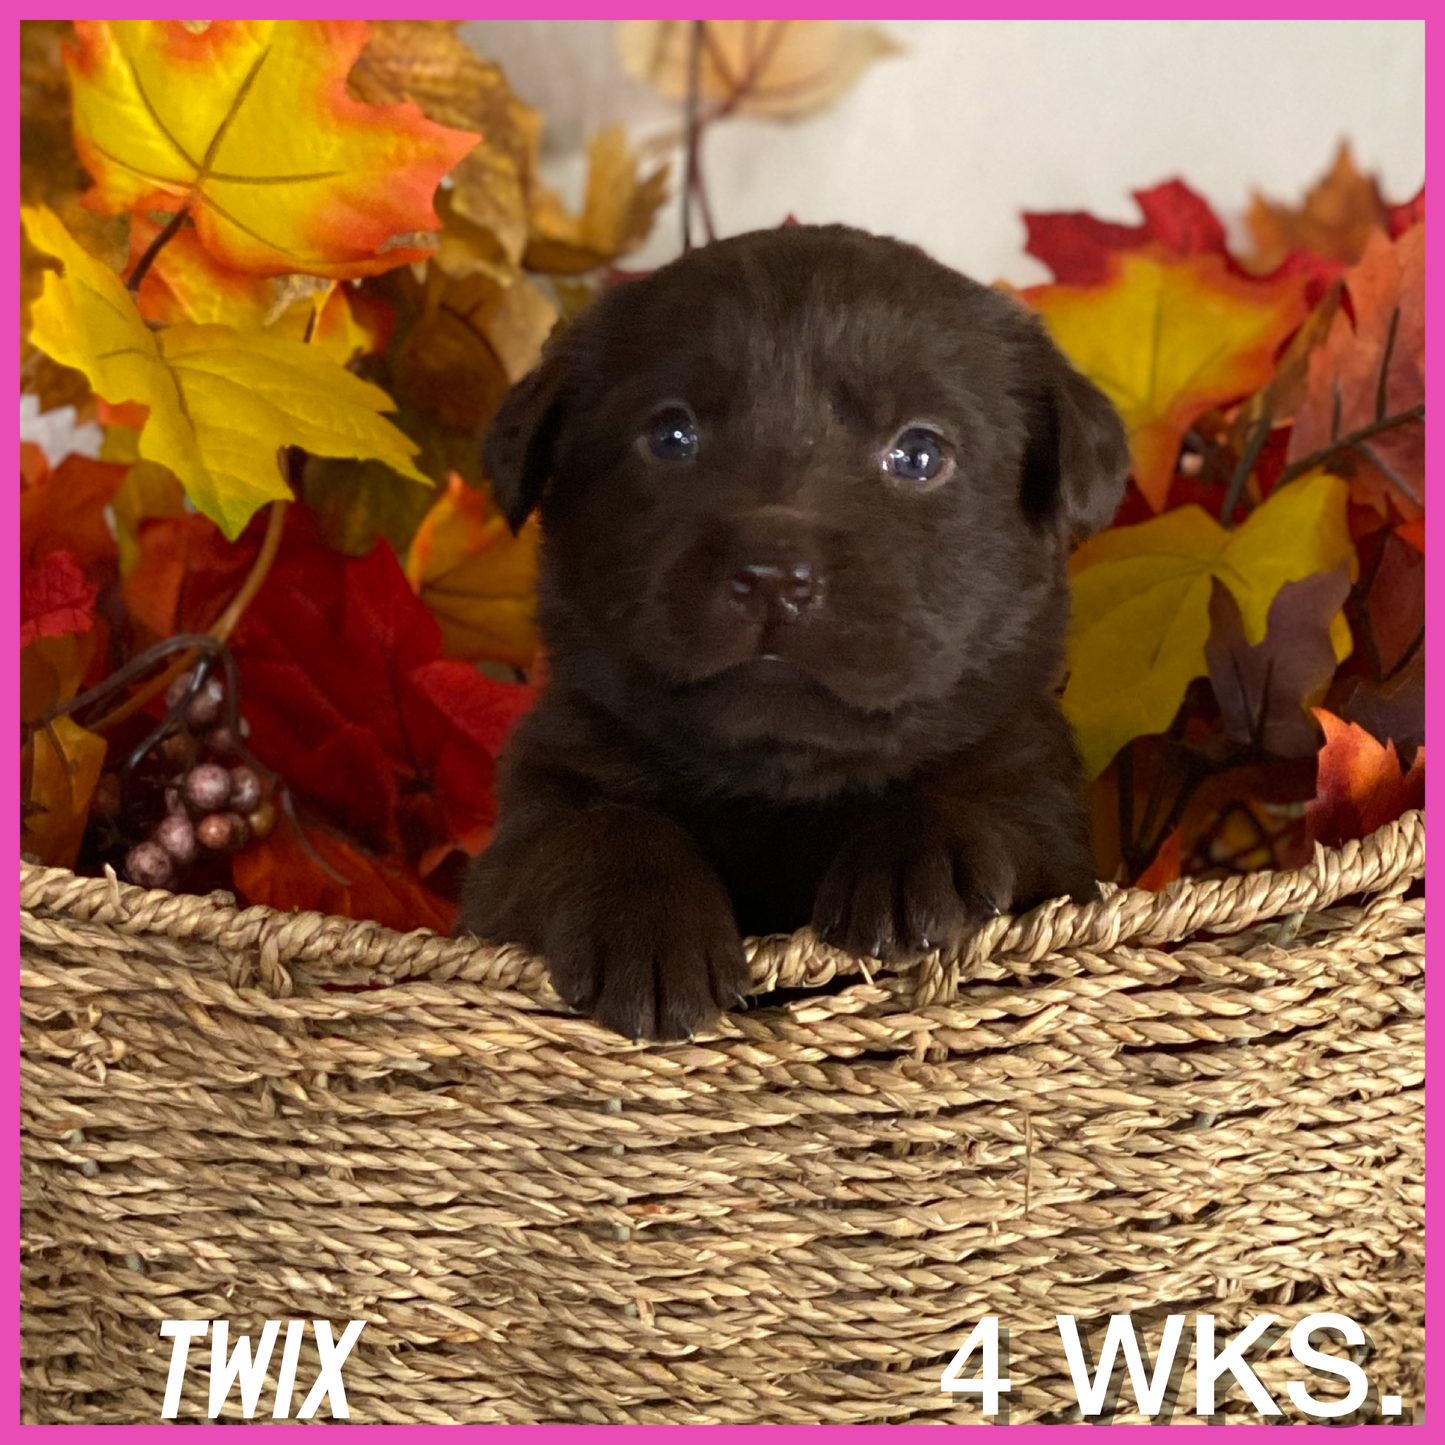 Chocolate Labrador Puppy Twix at 4 weeks old